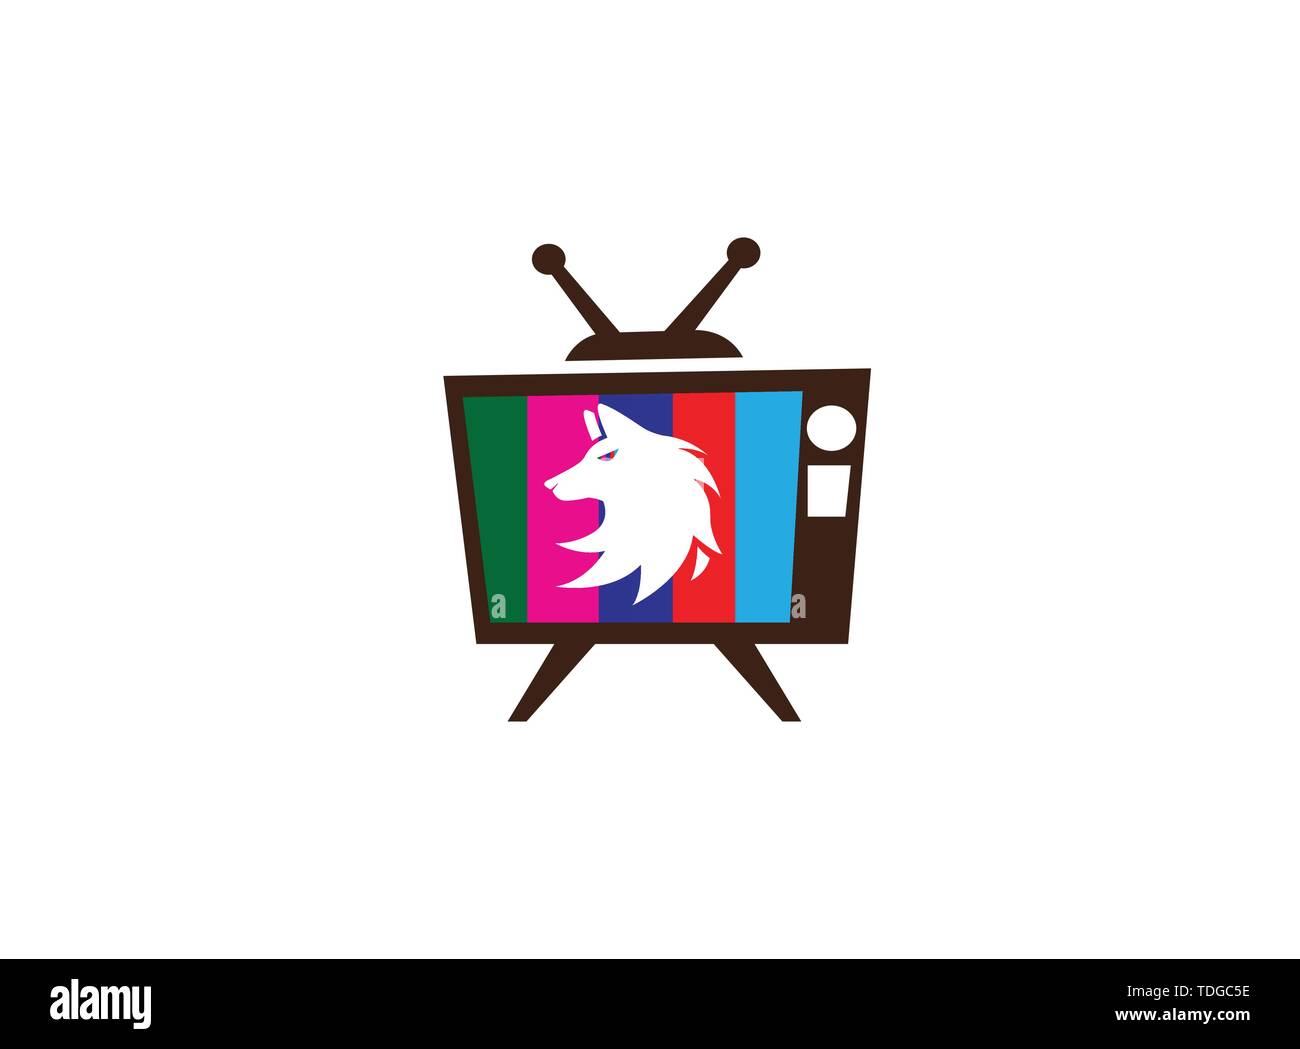 Wolf head logo fox face illustration design illustration in a old tv shape colors icon Stock Vector